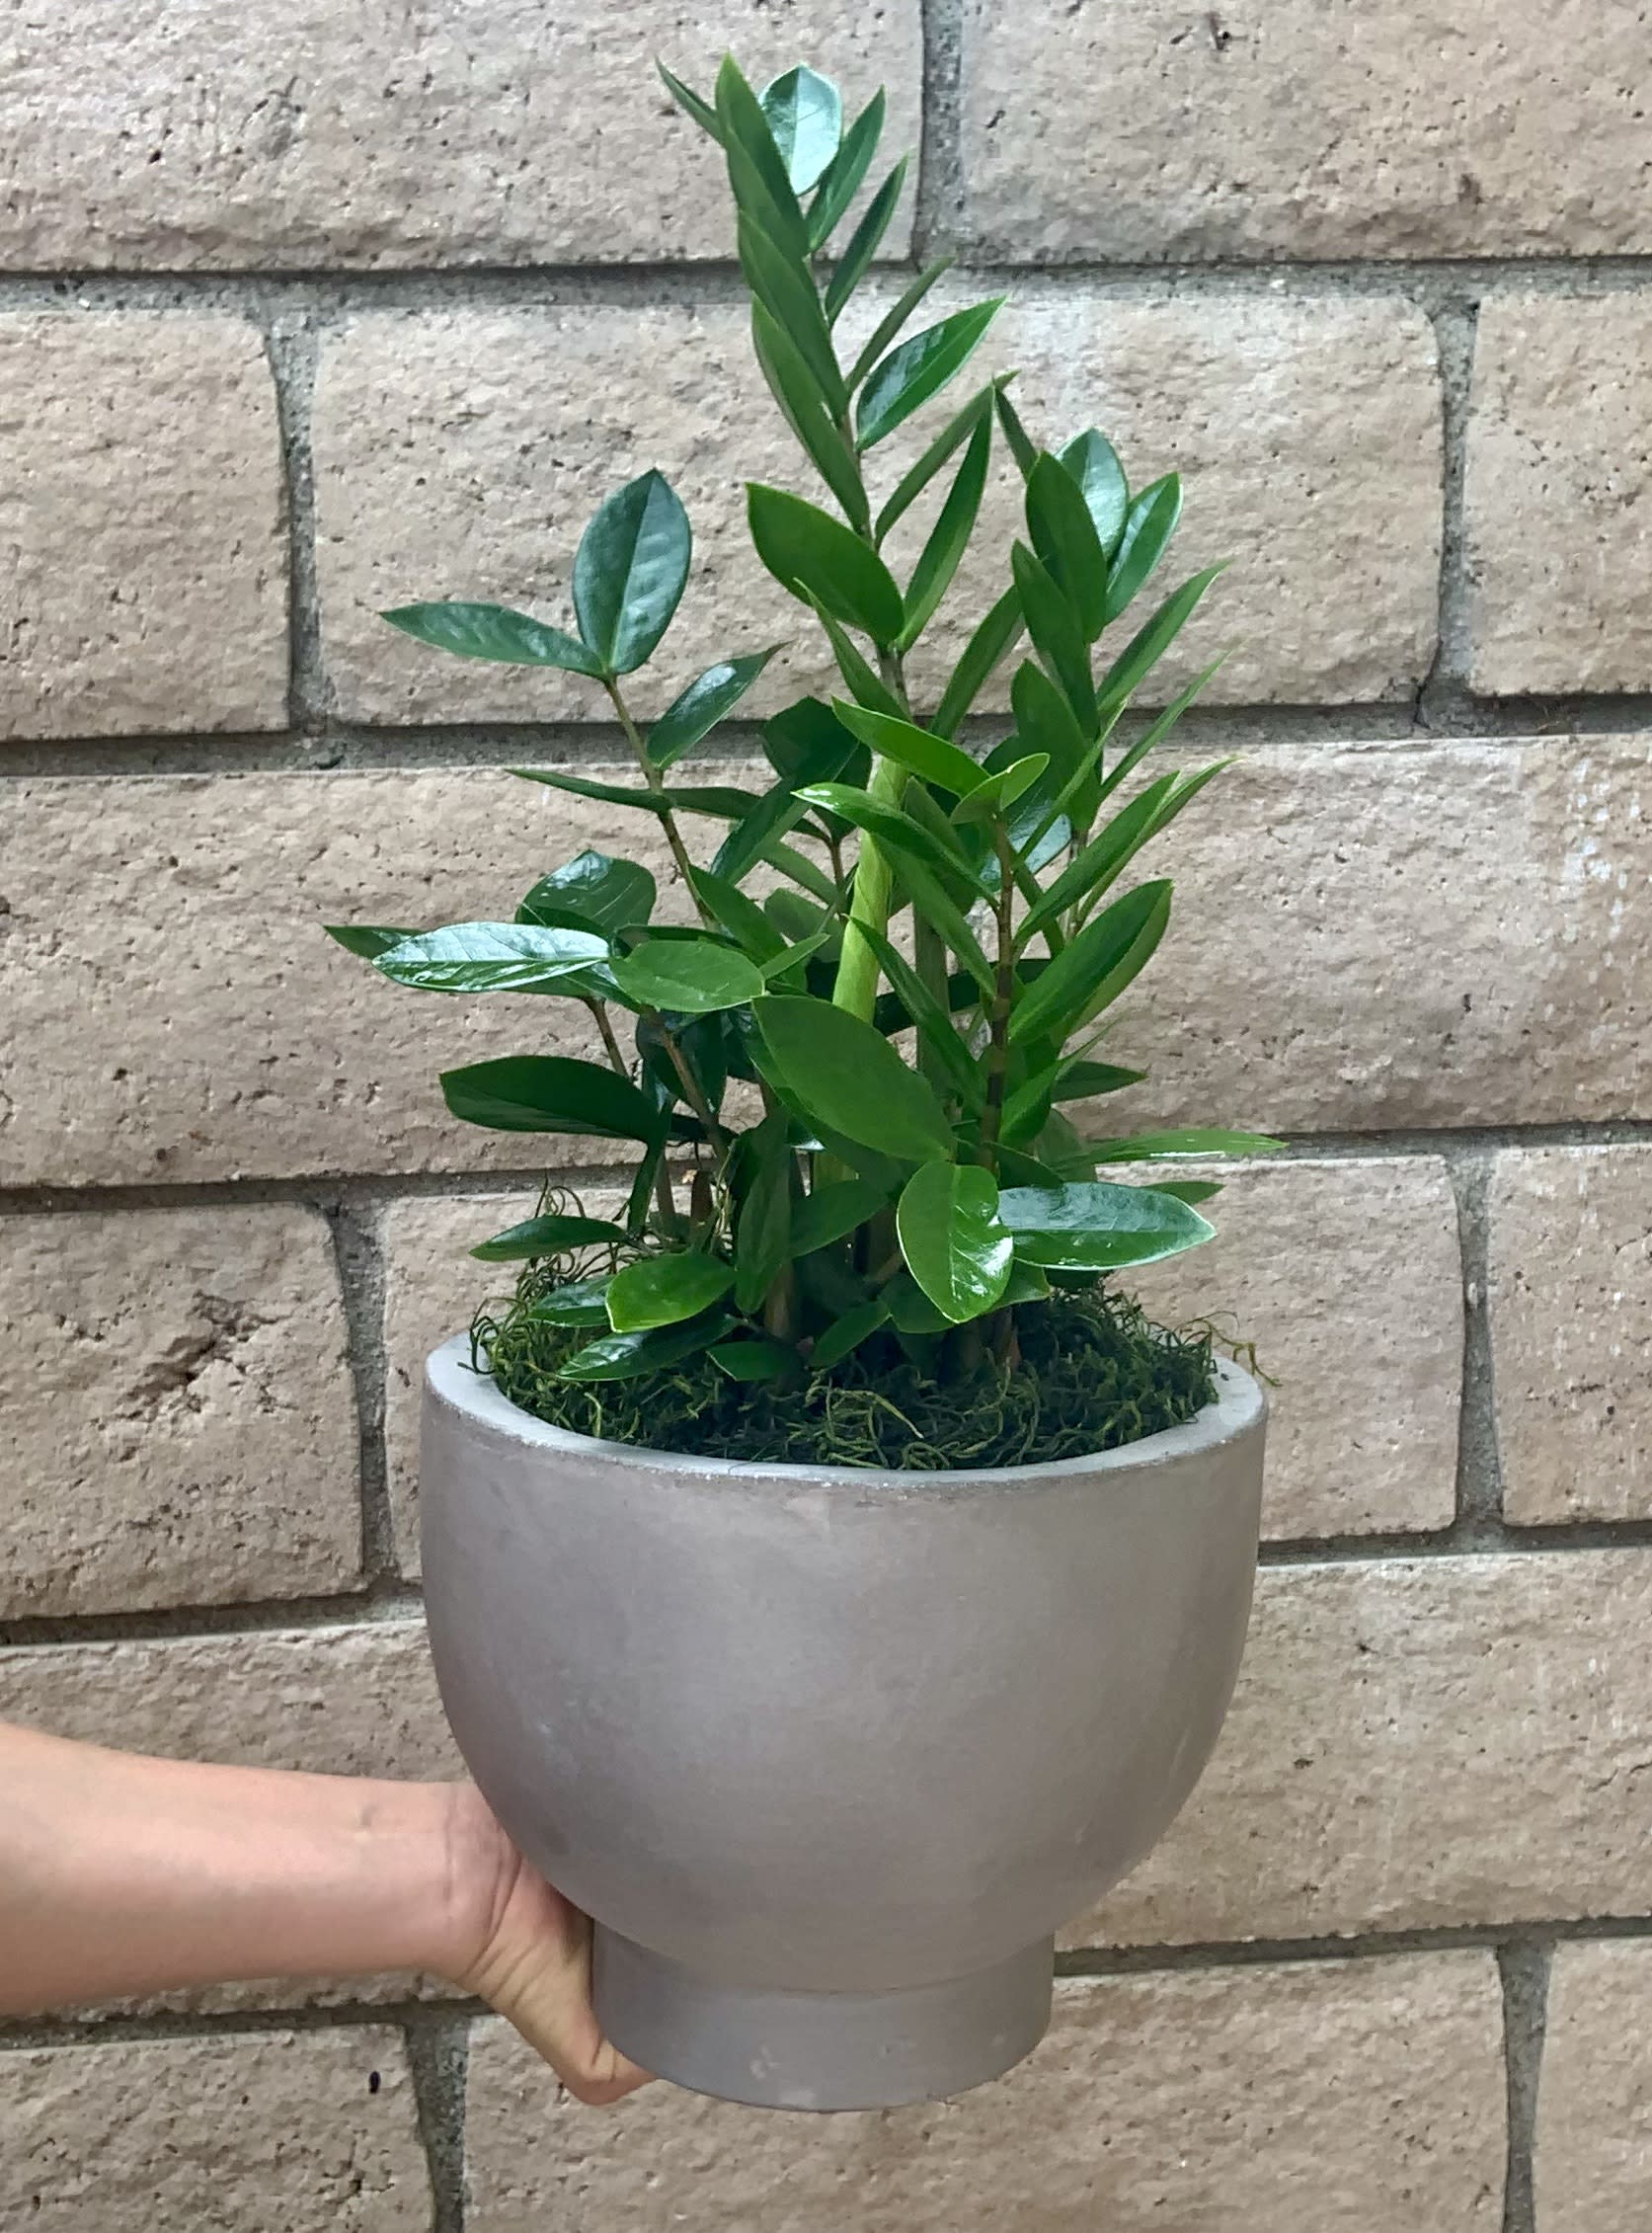 Zig Zag - A large and impressive gift of the very easy care ZZ Plant. Set in a footed cement container, finished with moss, the ZZ Plant is low water and low light friendly. Great for a large table or floor. An excellent gift or a treat for your own home!